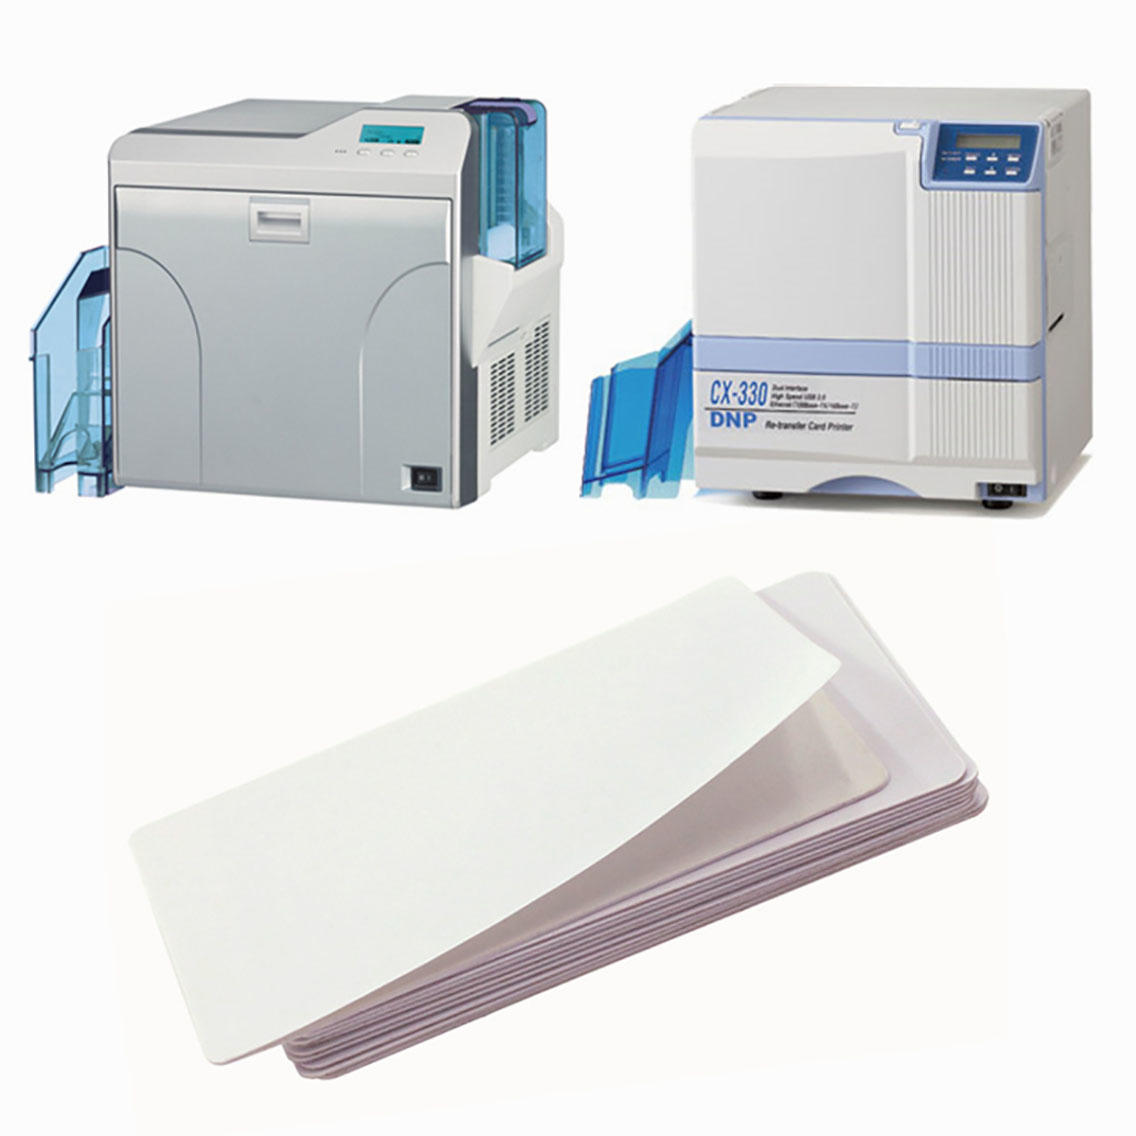 Cleanmo cost effective inkjet cleaning kit supplier for DNP CX-210, CX-320 & CX-330 Printers-2